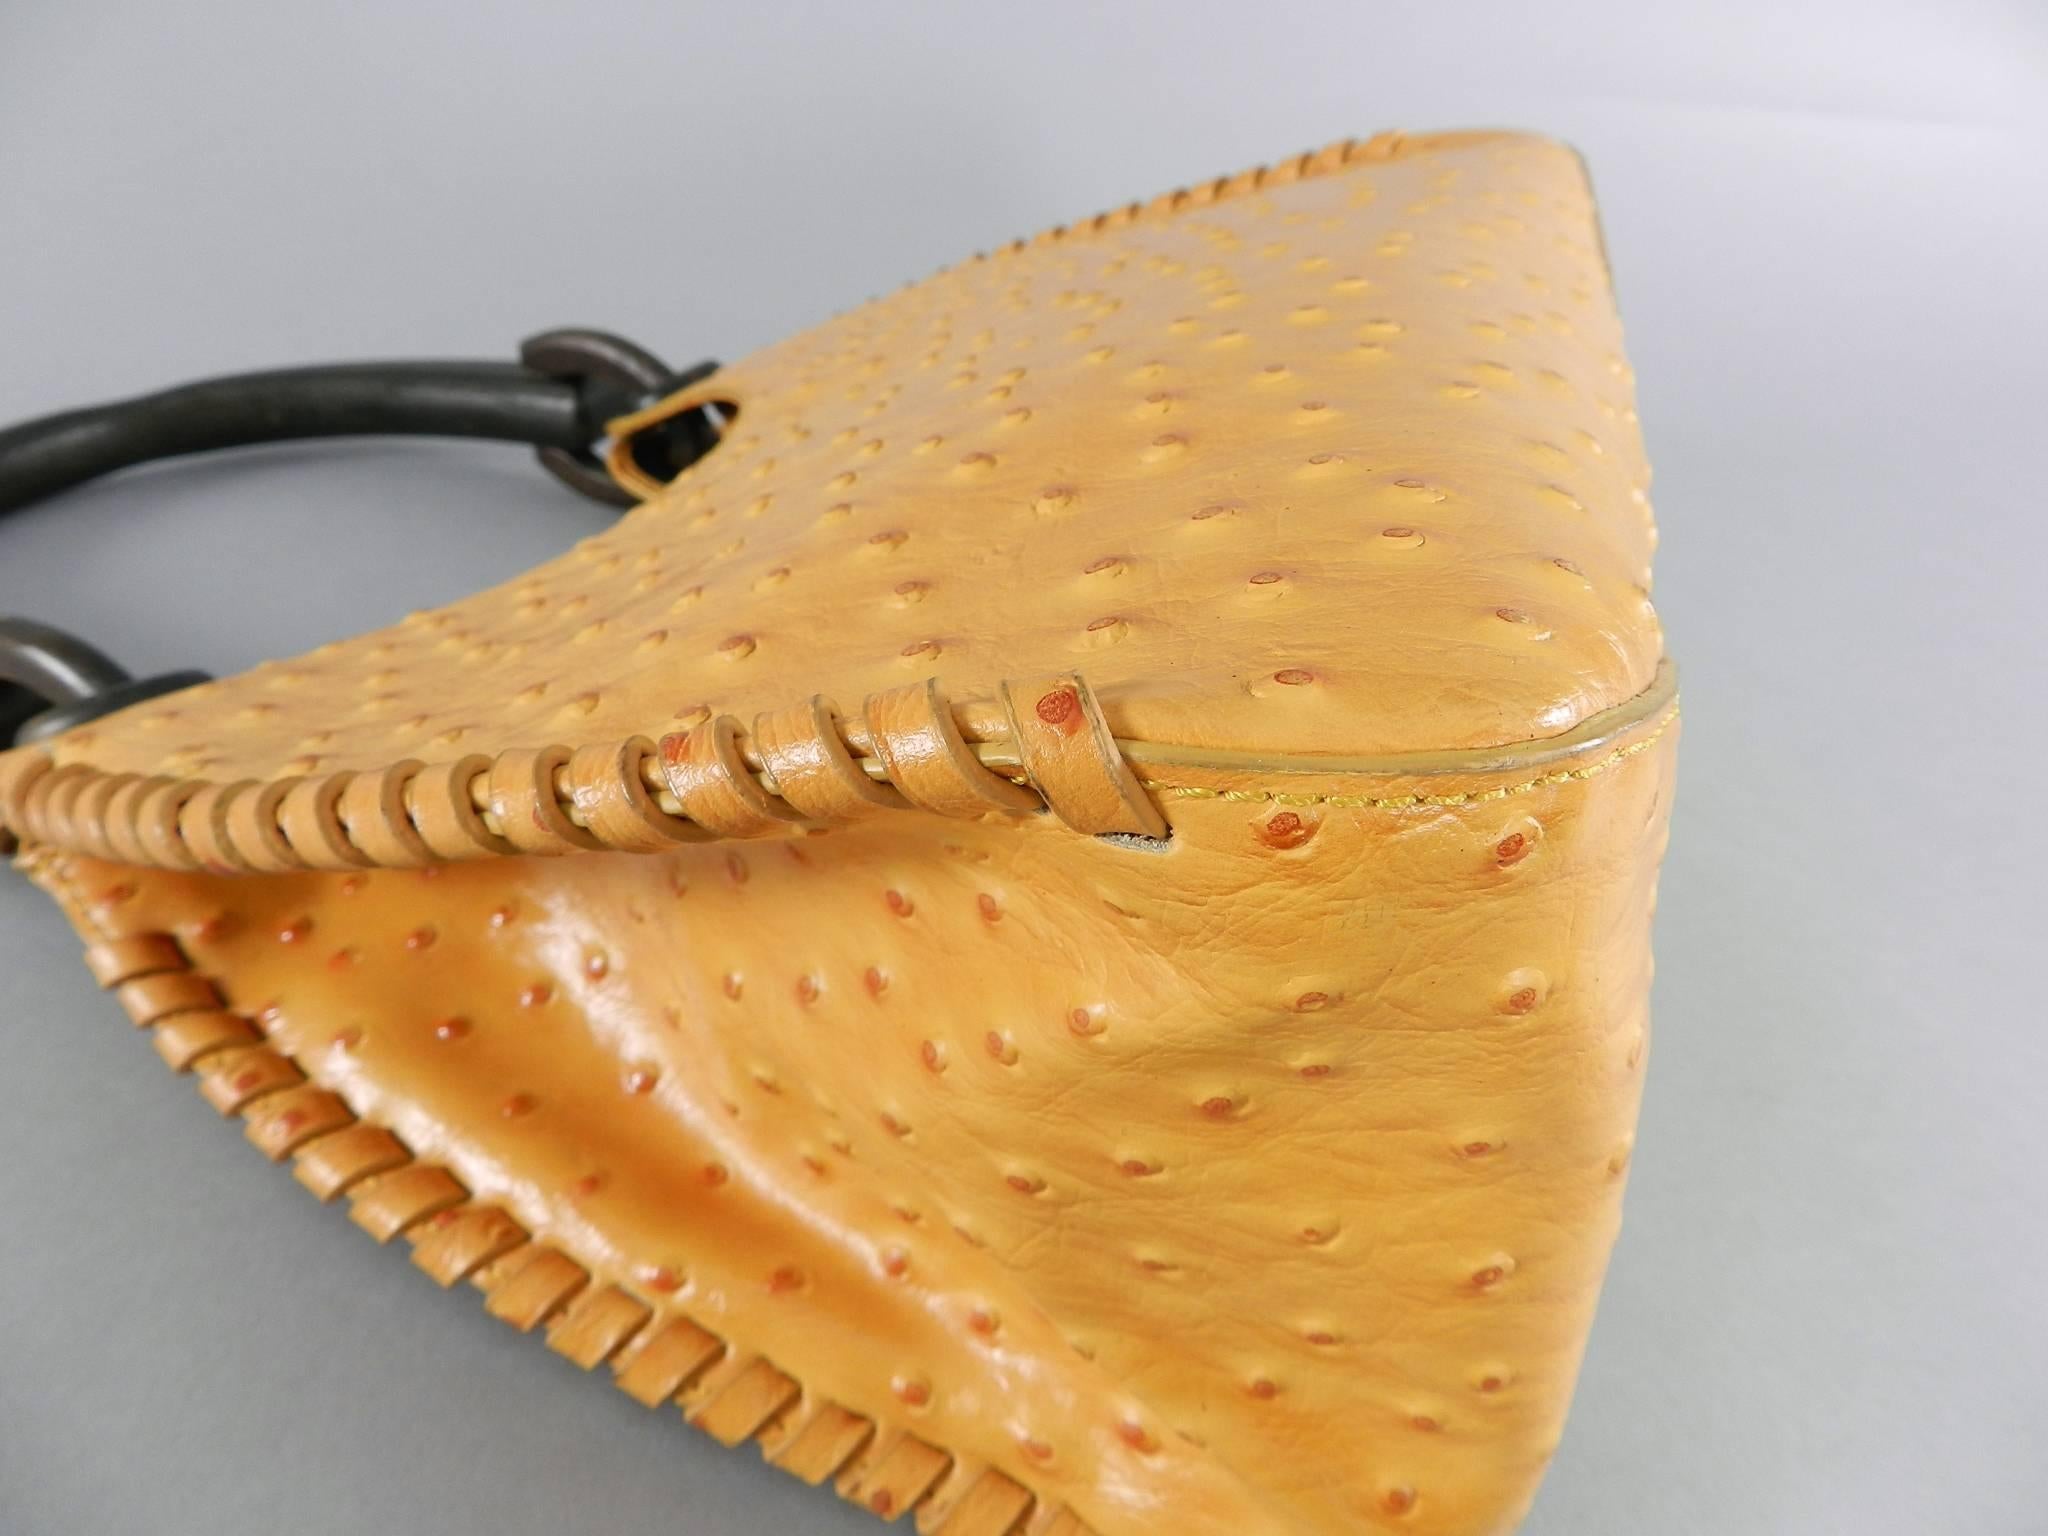 Orange Gucci Ostrich Whipstitch Bag with Wood Handle